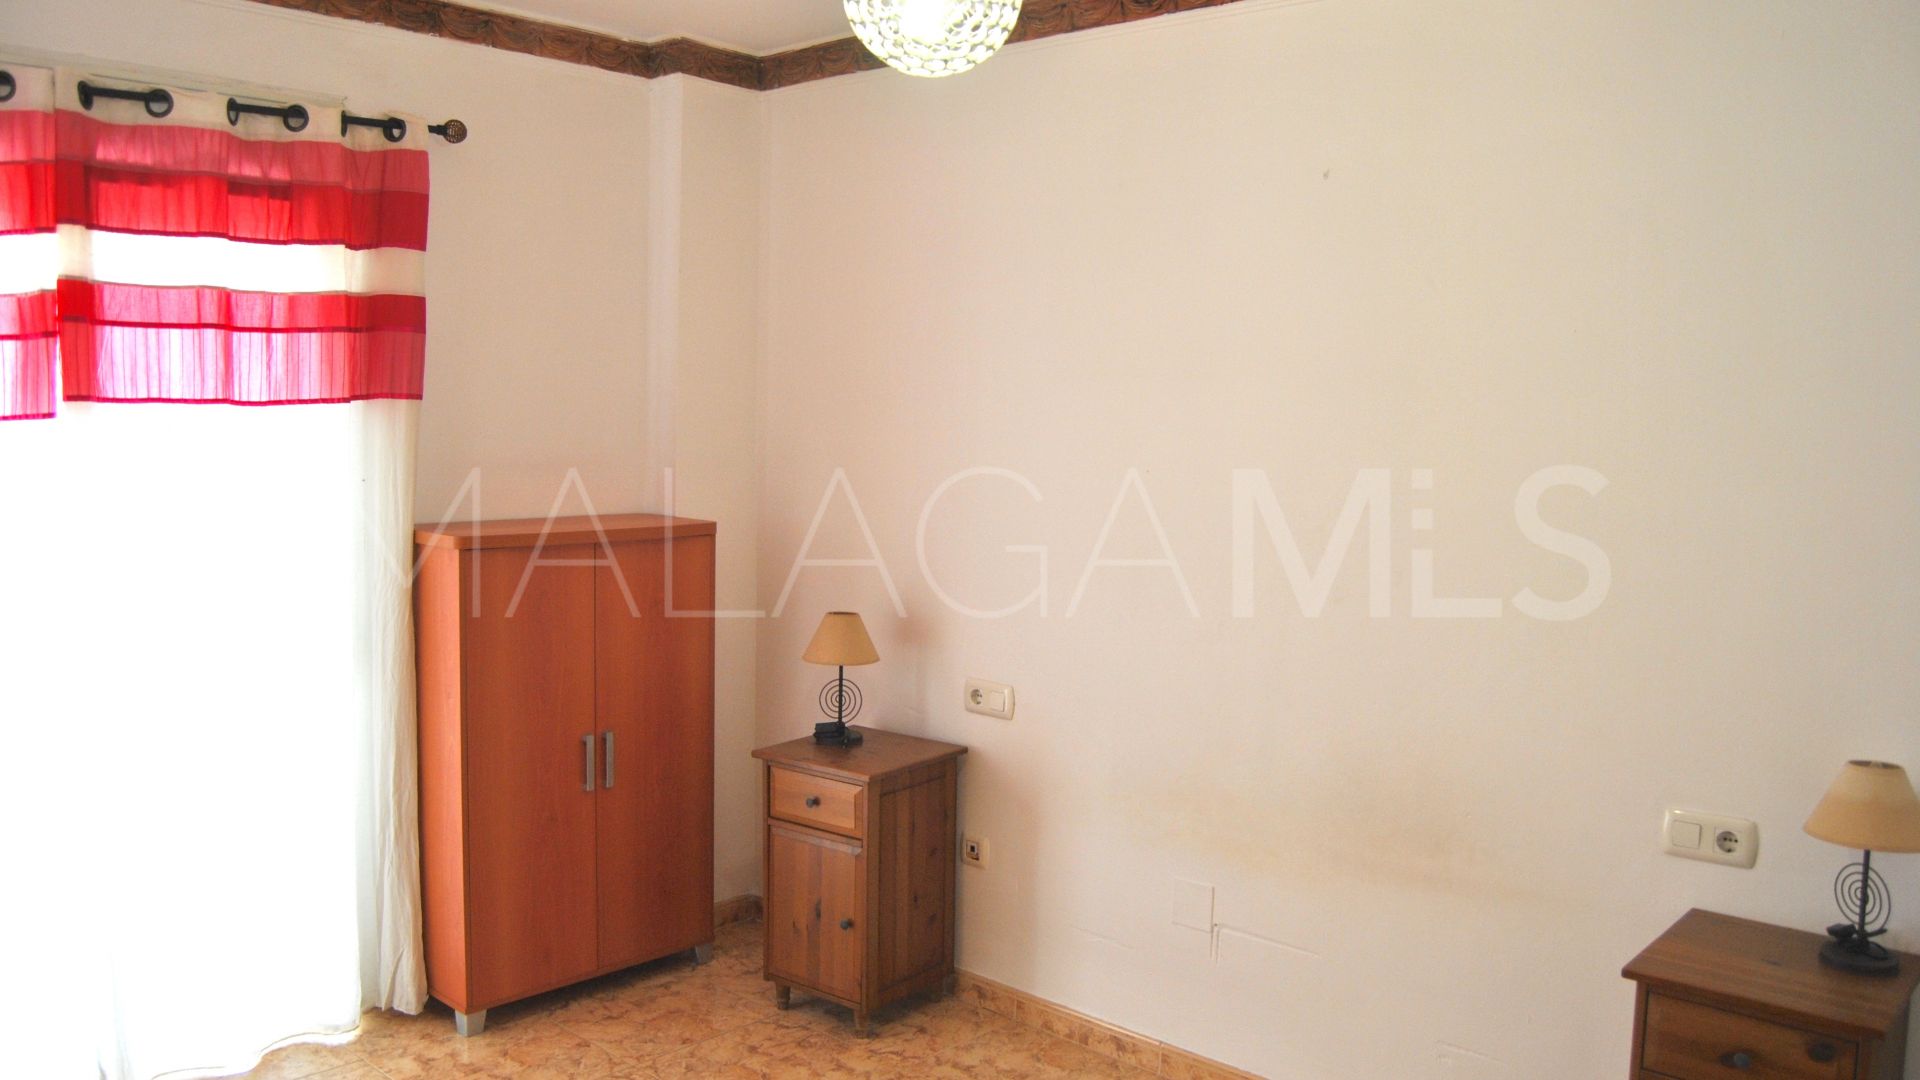 For sale apartment with 3 bedrooms in Calvario